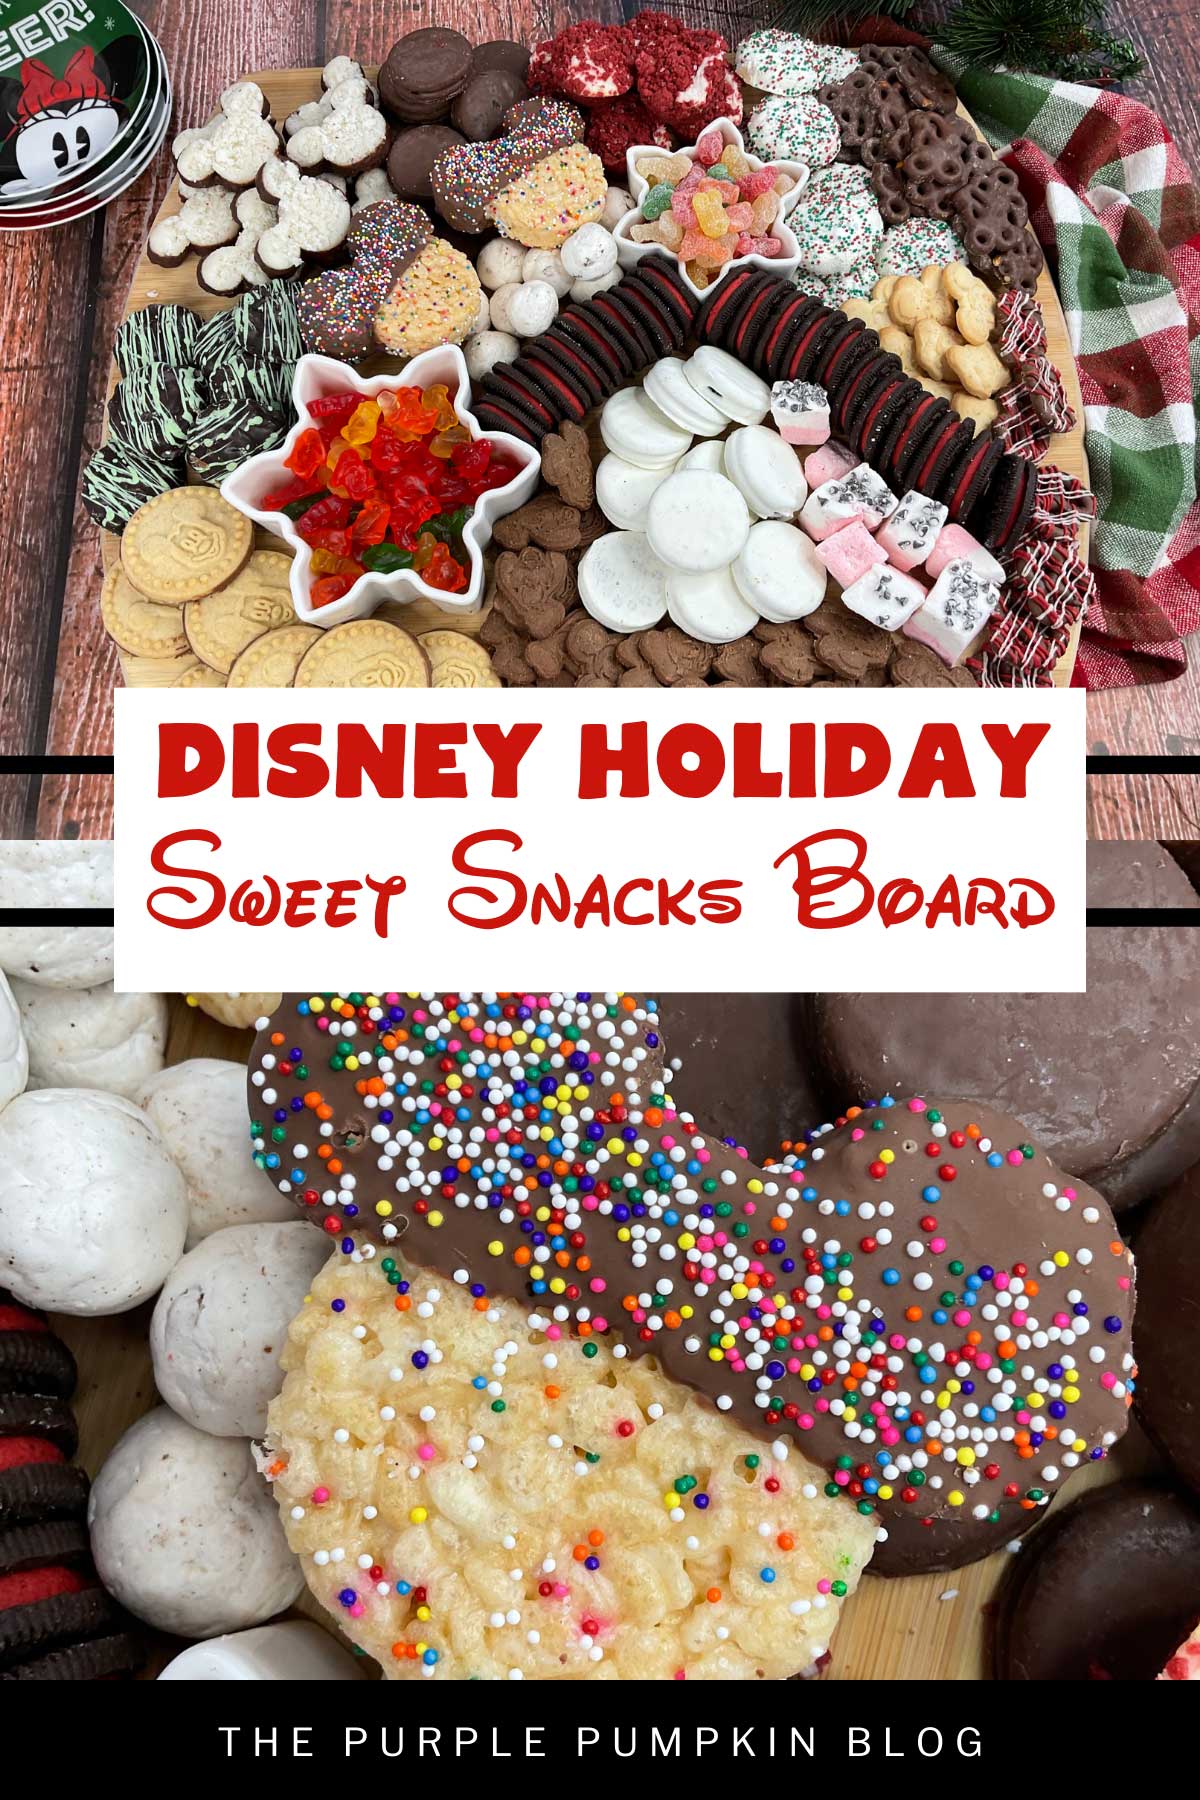 A wooden board covered with a variety of Mickey Mouse sweet treats - cookies, chocolate-covered pretzels, gummies, coconut patties, and rice krispy treats. Additional generic holiday treats and cookies are also on the board. The board is sat on a festive cloth, with a stack of Disney plates to the side.